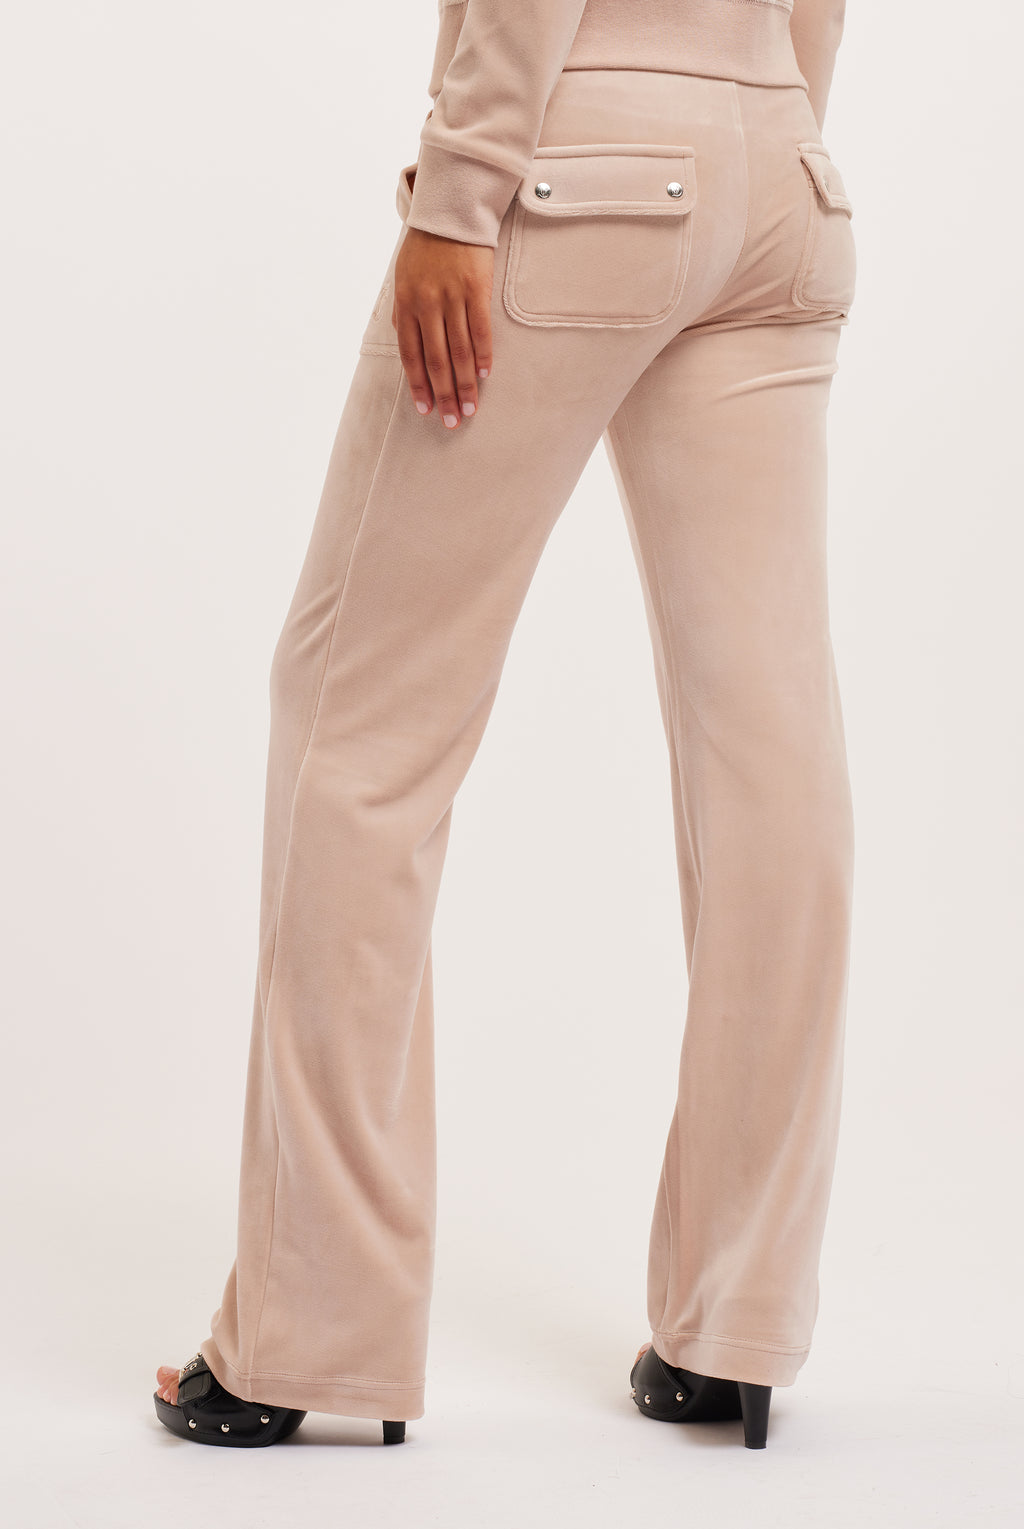 MUSHROOM CLASSIC VELOUR DEL RAY POCKETED BOTTOMS